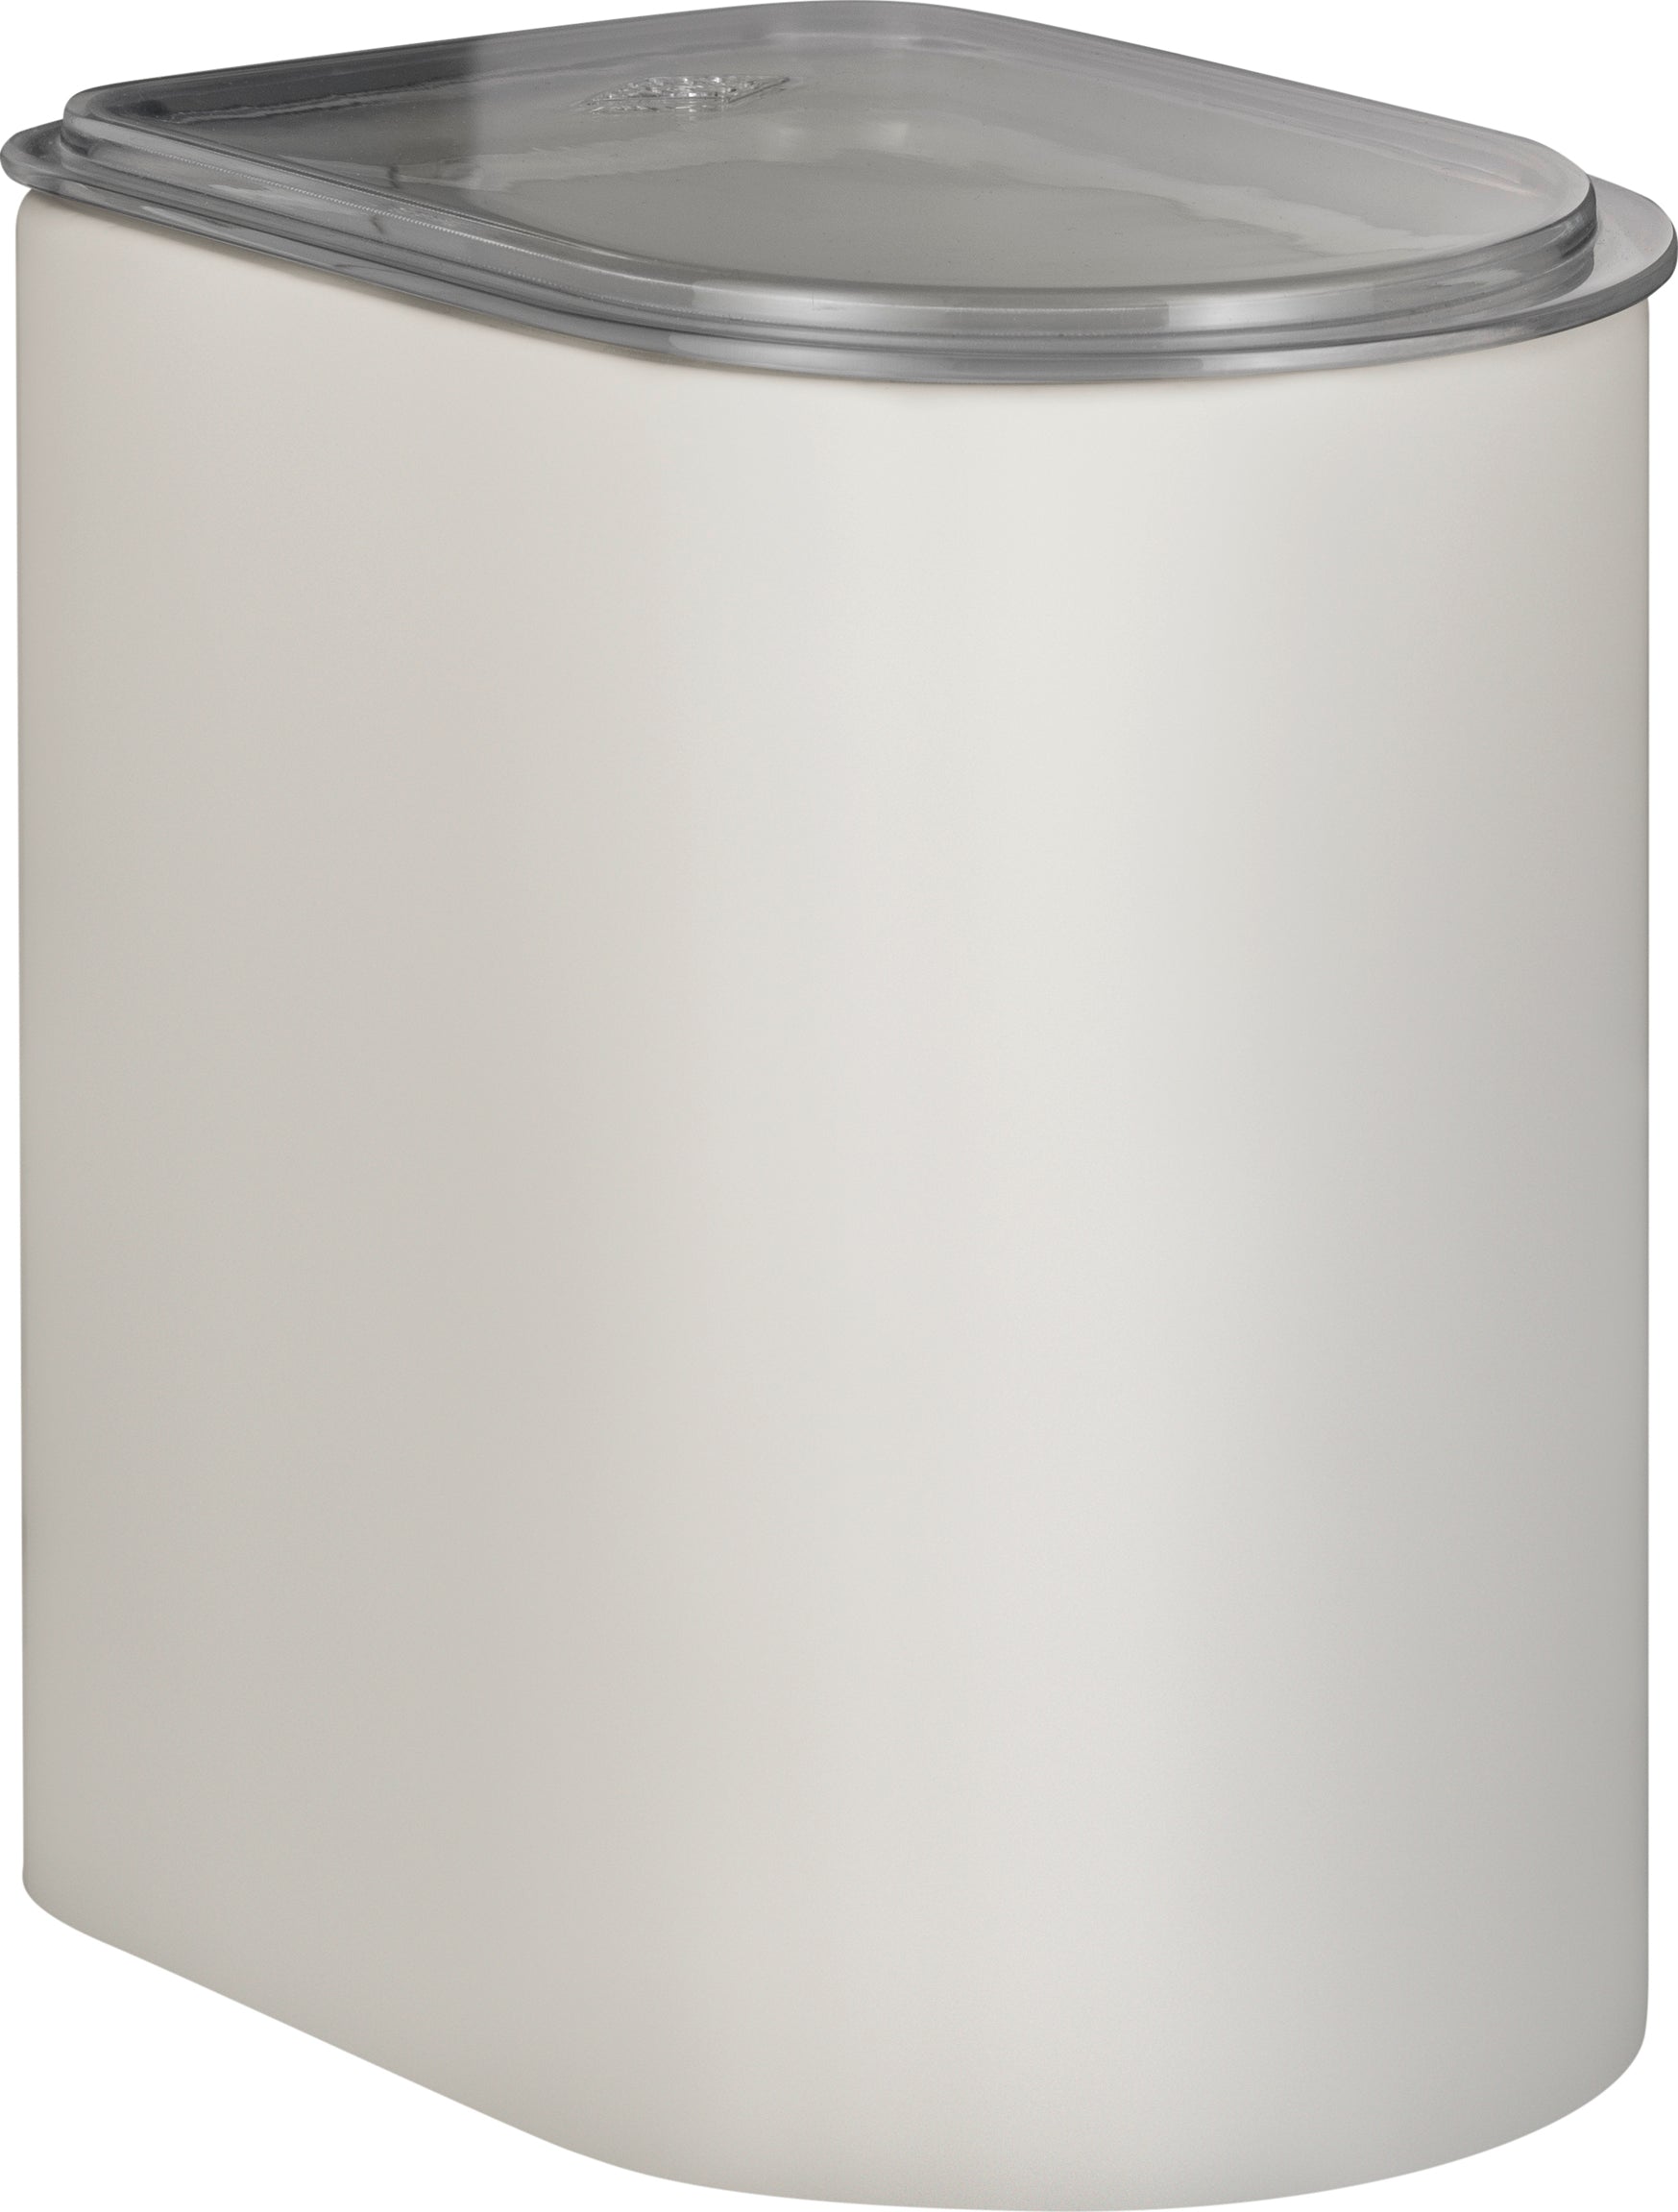 Wesco Canister 2,2 Litre With Acrylic Lid, Matt Sand